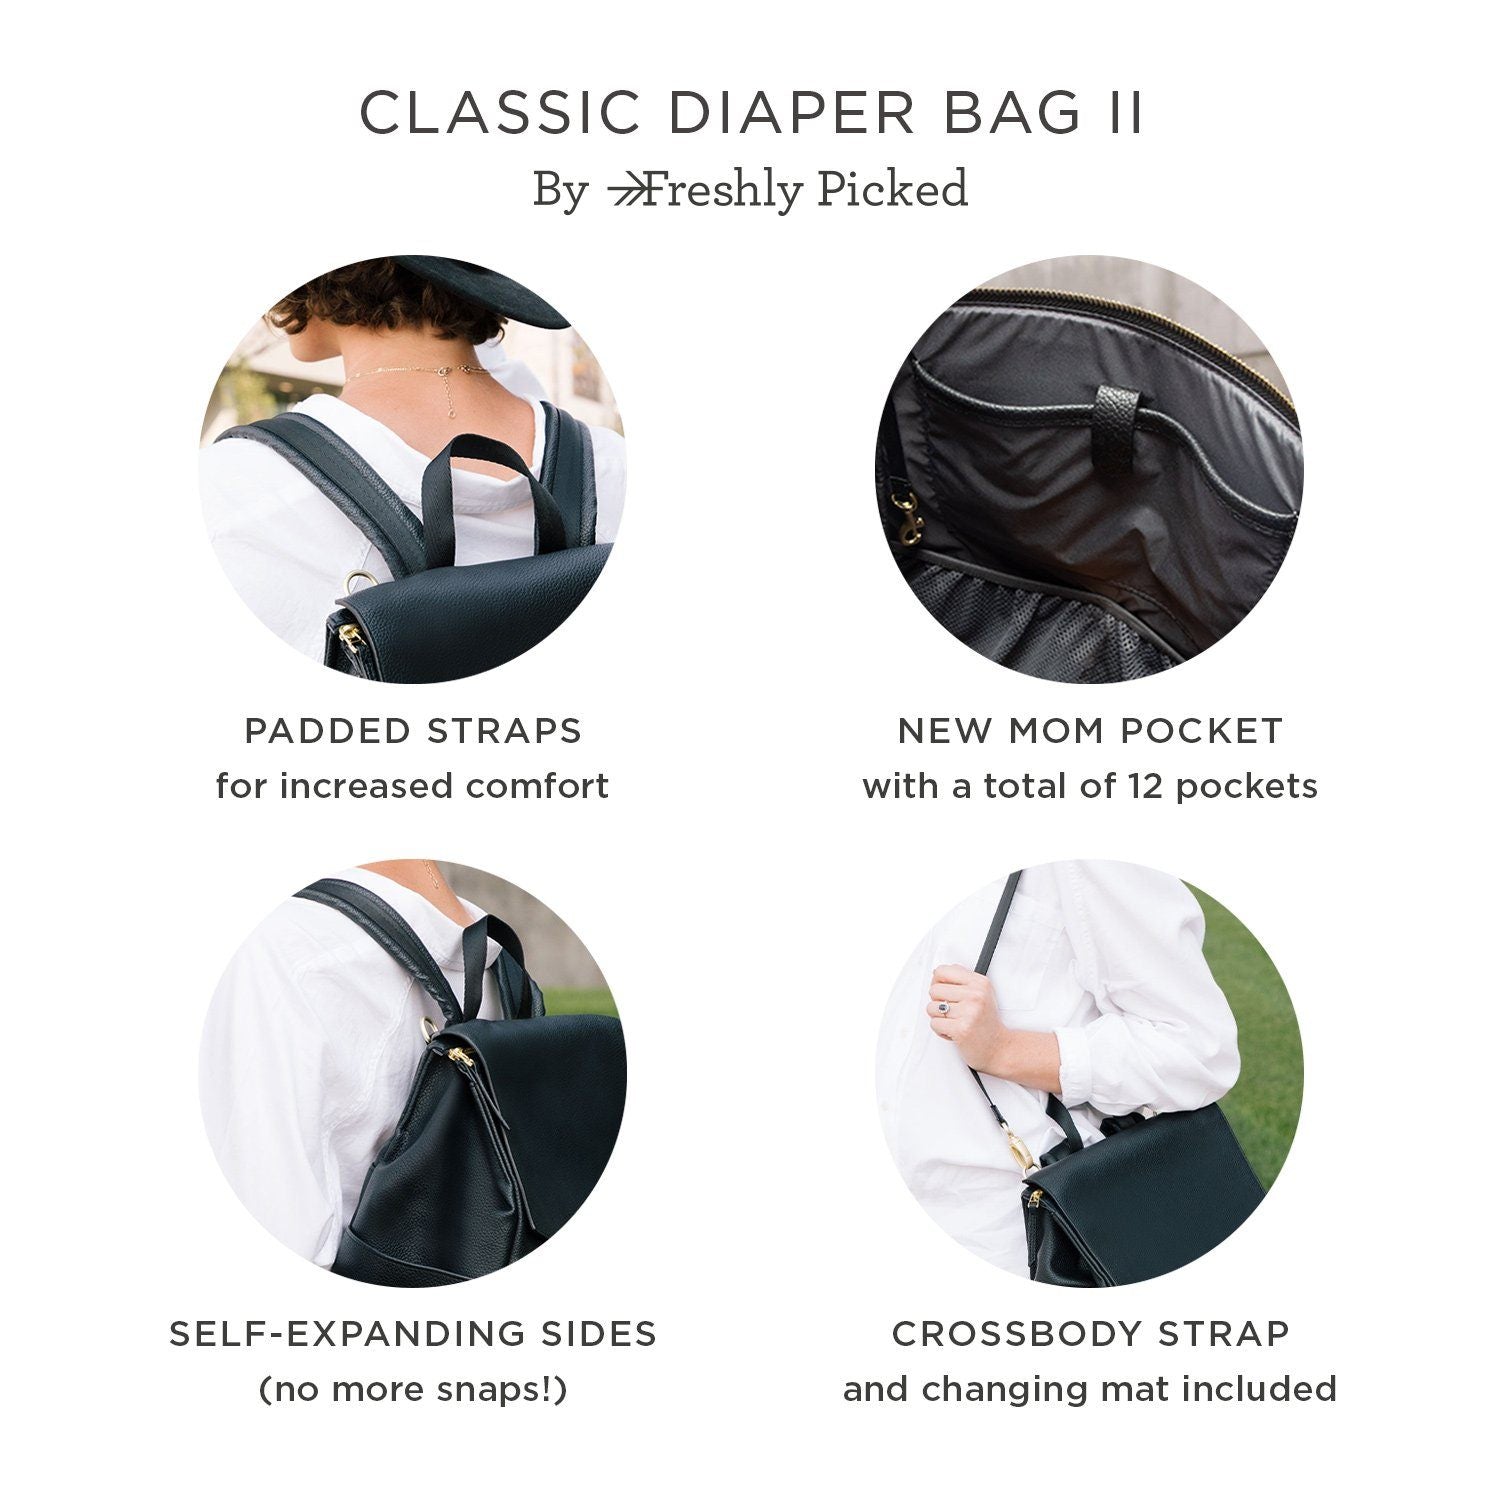 Freshly Picked Diaper Bag: The Perfect Gift for Parents